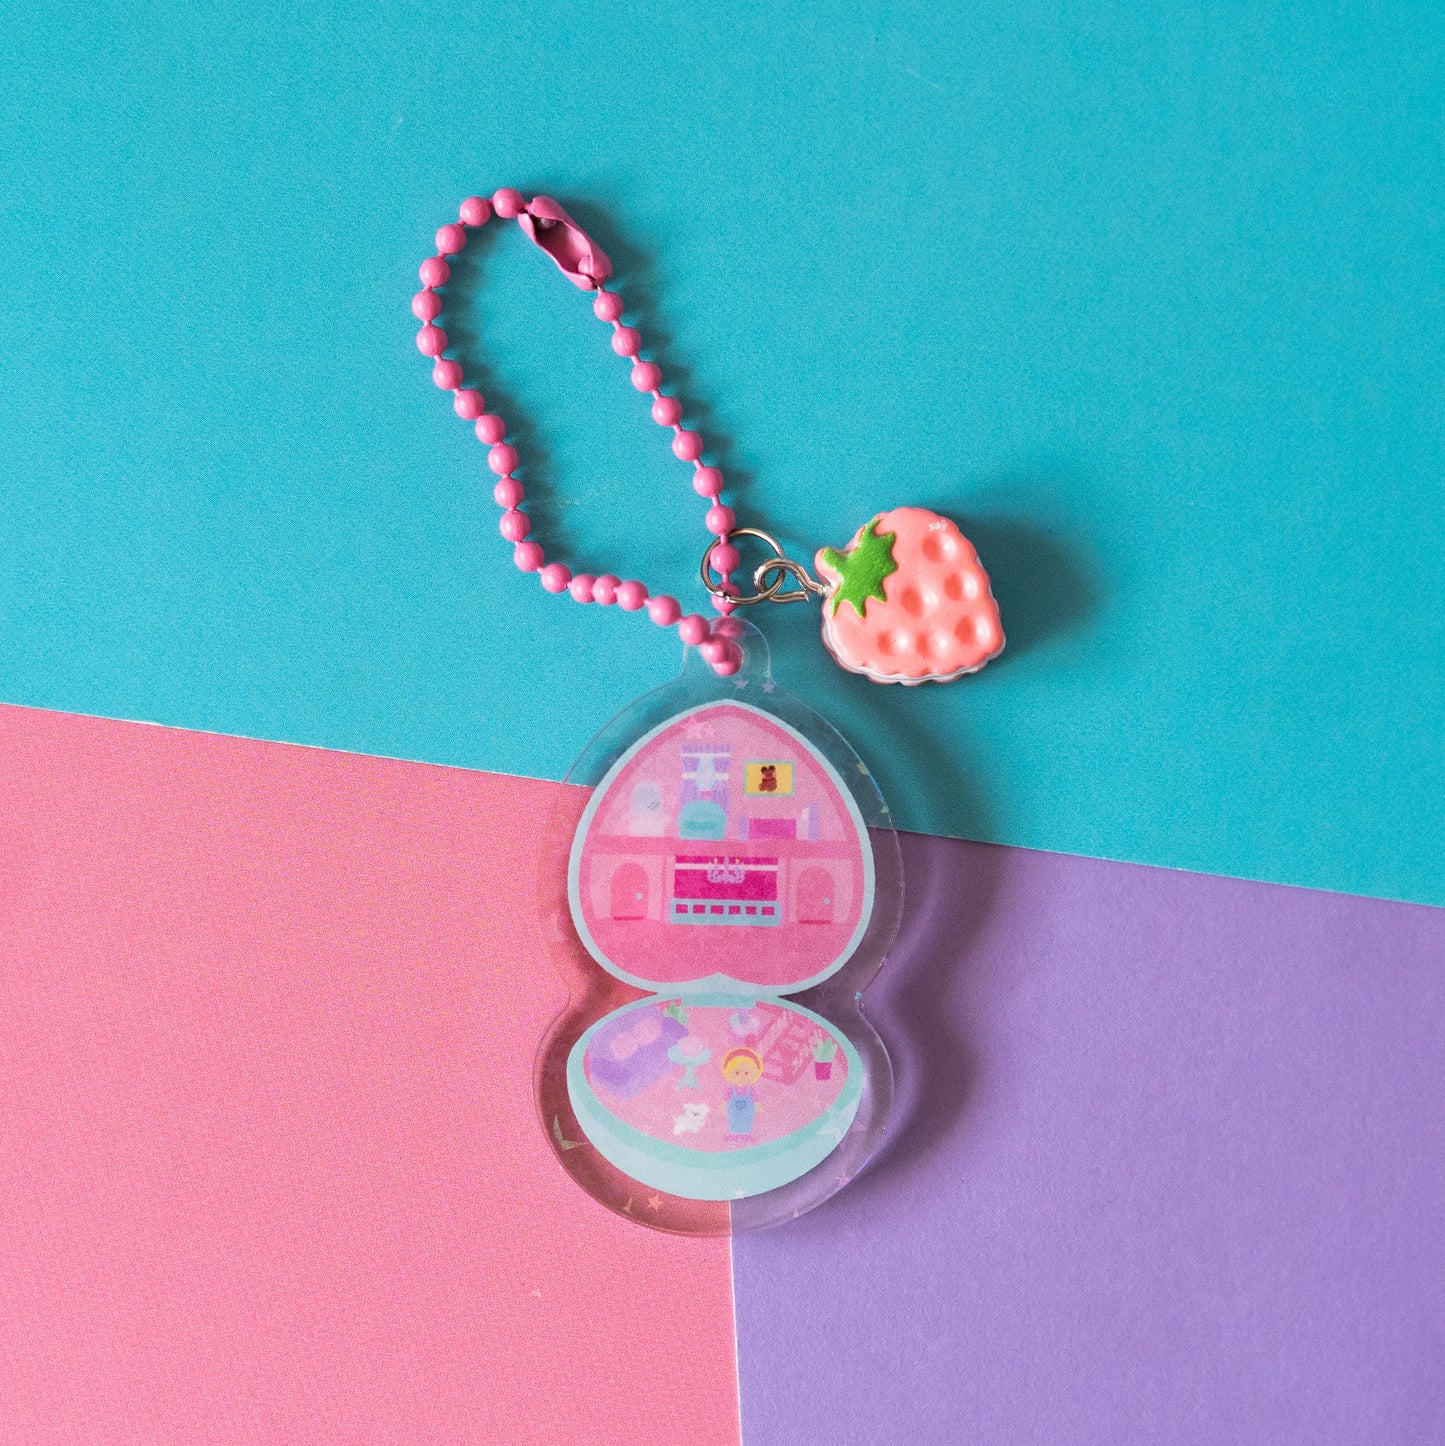 Polly Pocket with Strawberry Charm Holographic Sparkle Acrylic Journal Keyring Keychain